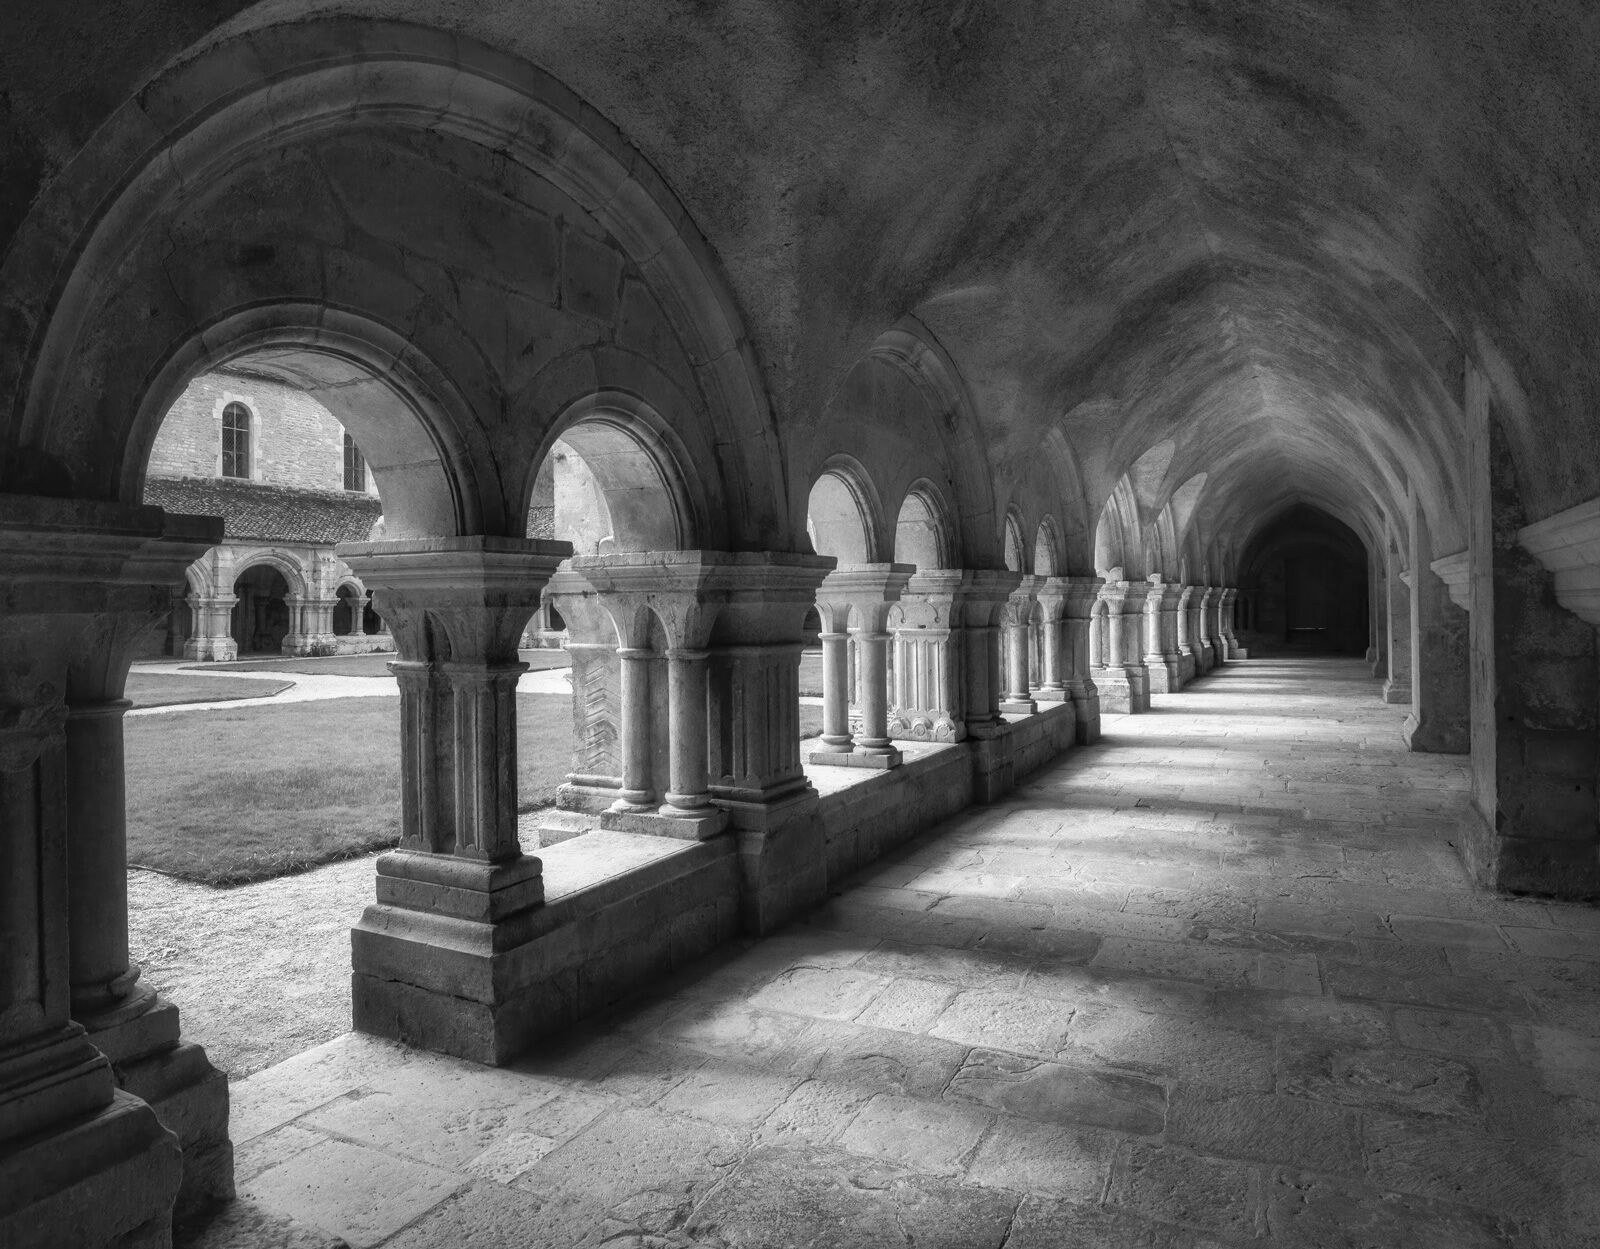 inside the cloister of abbey fontenay with afternoon sunlight beaming through the stone pillars.